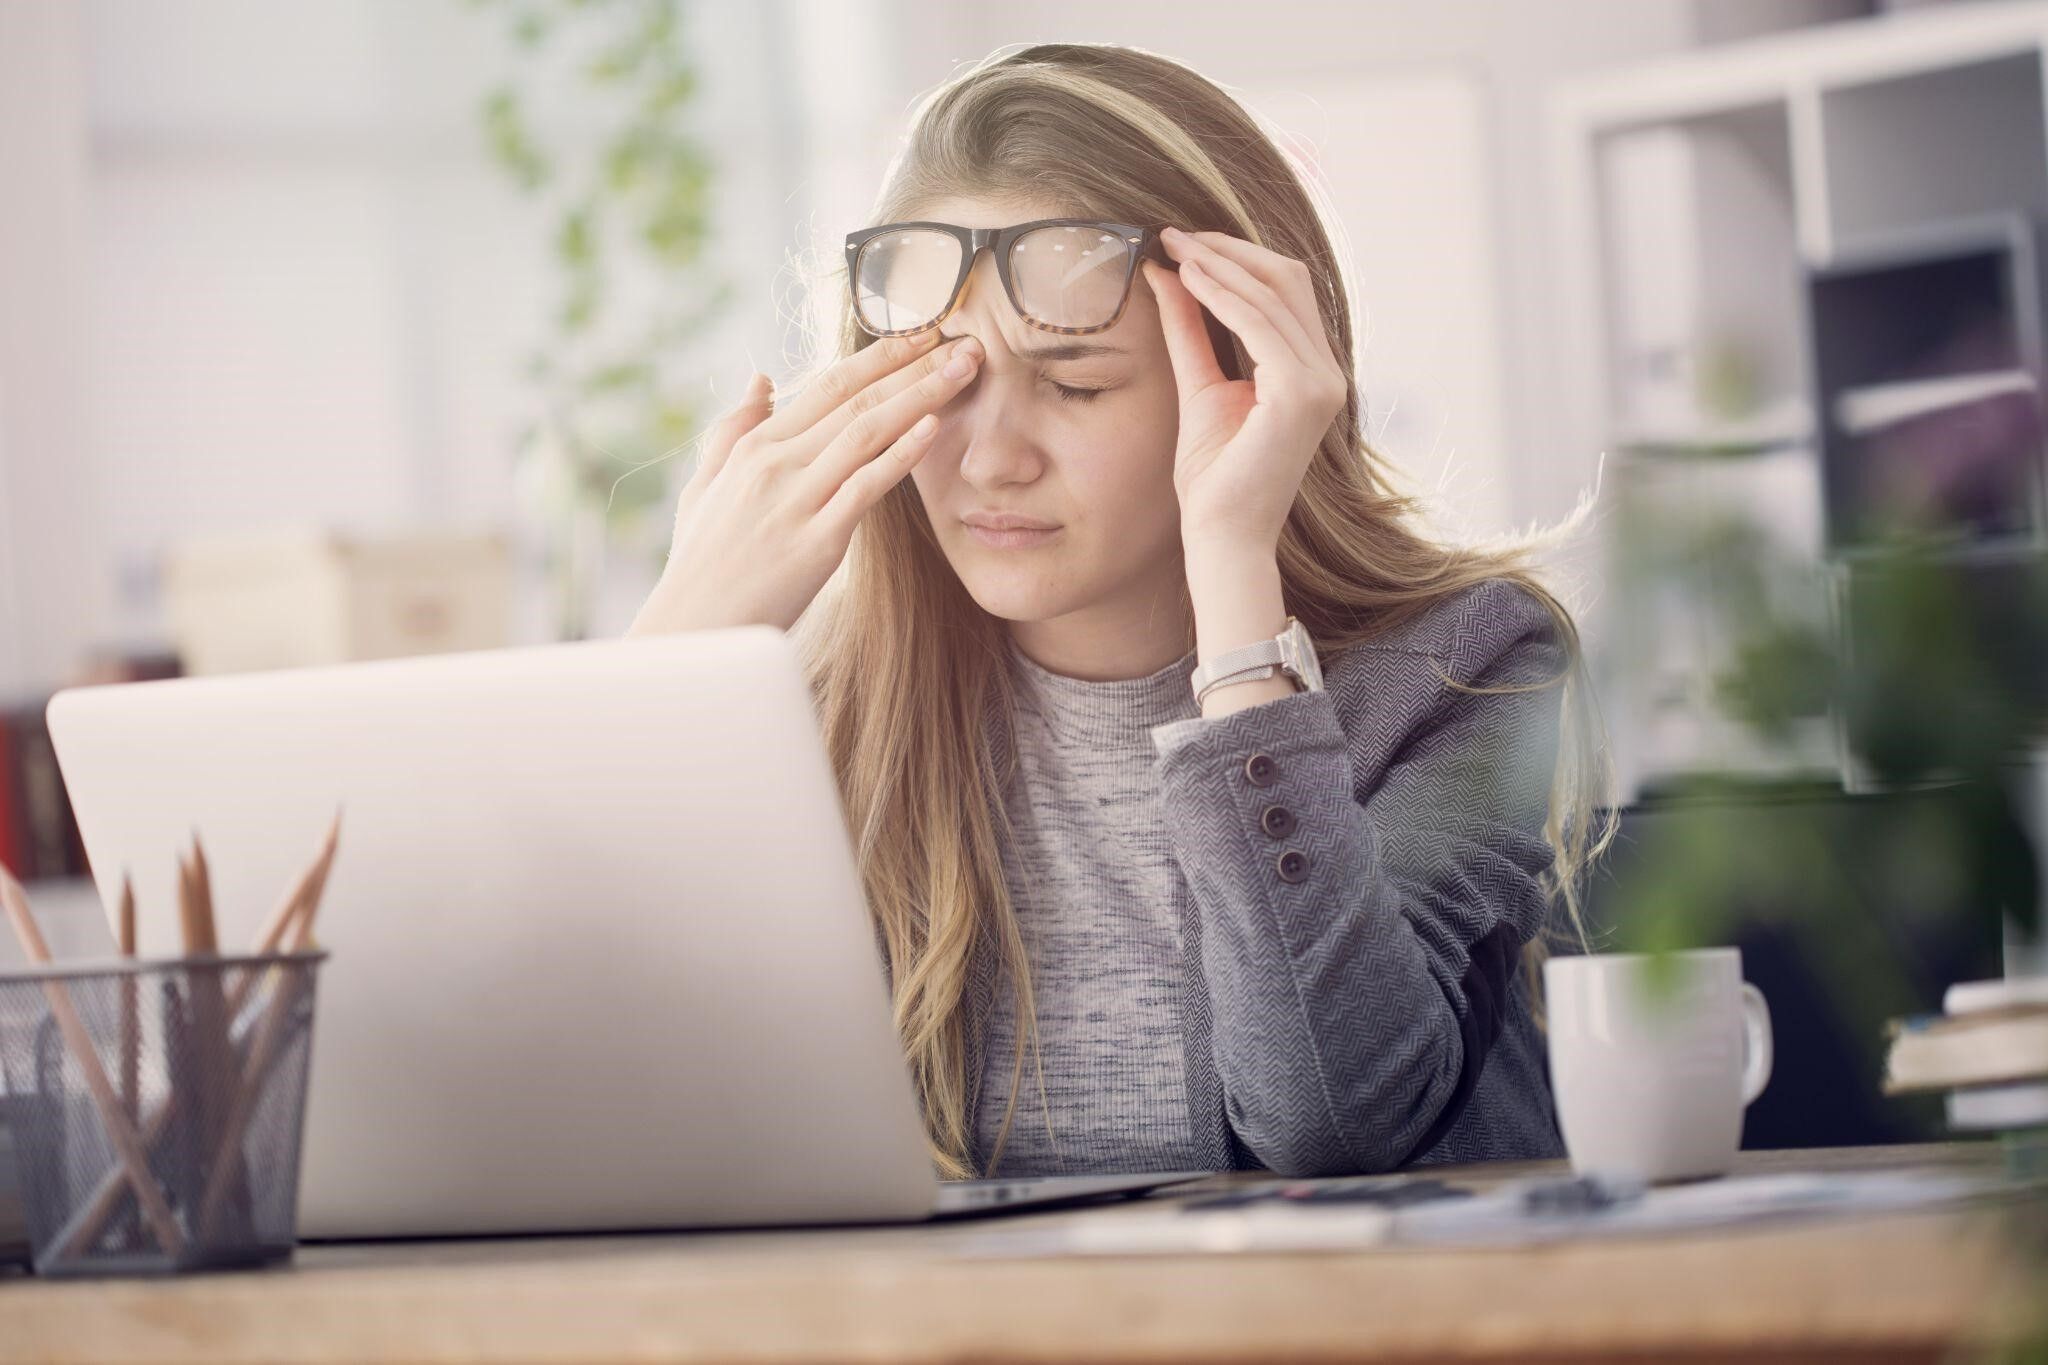 Girl in front of computer rubbing her eyes